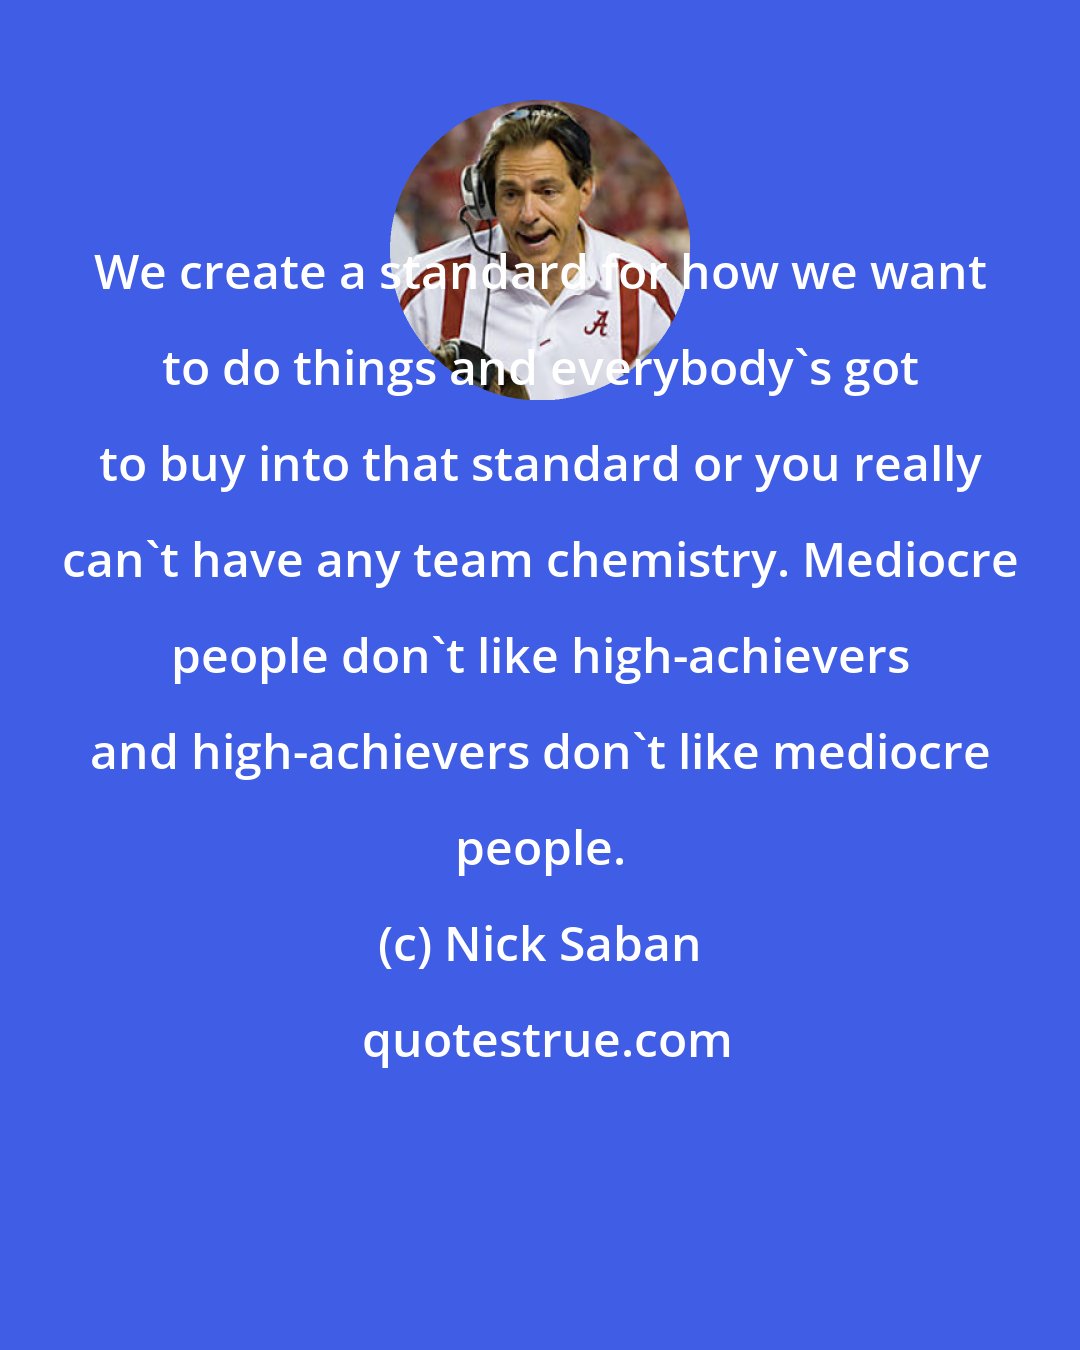 Nick Saban: We create a standard for how we want to do things and everybody's got to buy into that standard or you really can't have any team chemistry. Mediocre people don't like high-achievers and high-achievers don't like mediocre people.